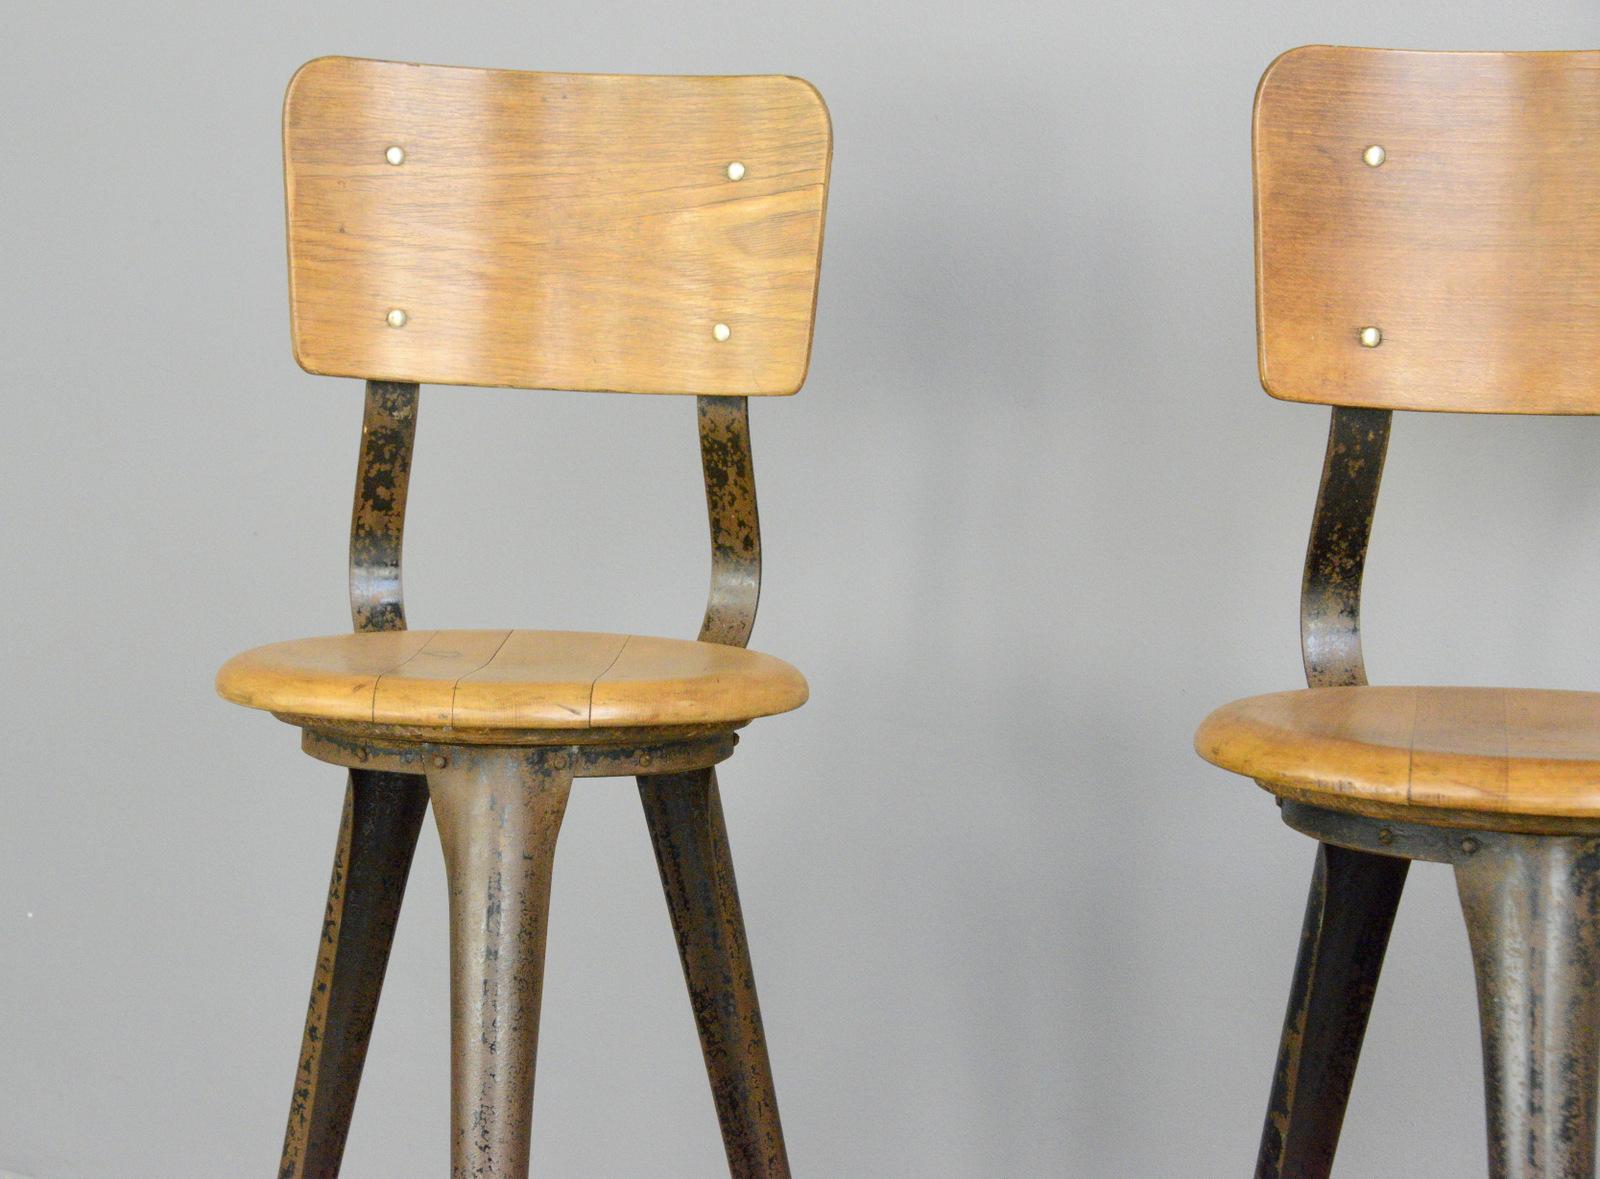 Industrial work stools by Ama, circa 1930s

- Price is per stool
- Steel frame
- Solid elm seat with ply backrest
- Designed by Albert Menger 
- Produced by Ama, Nordhalben
- German, 1930s
- Measures: 35cm wide x 41cm deep 
- 56cm seat